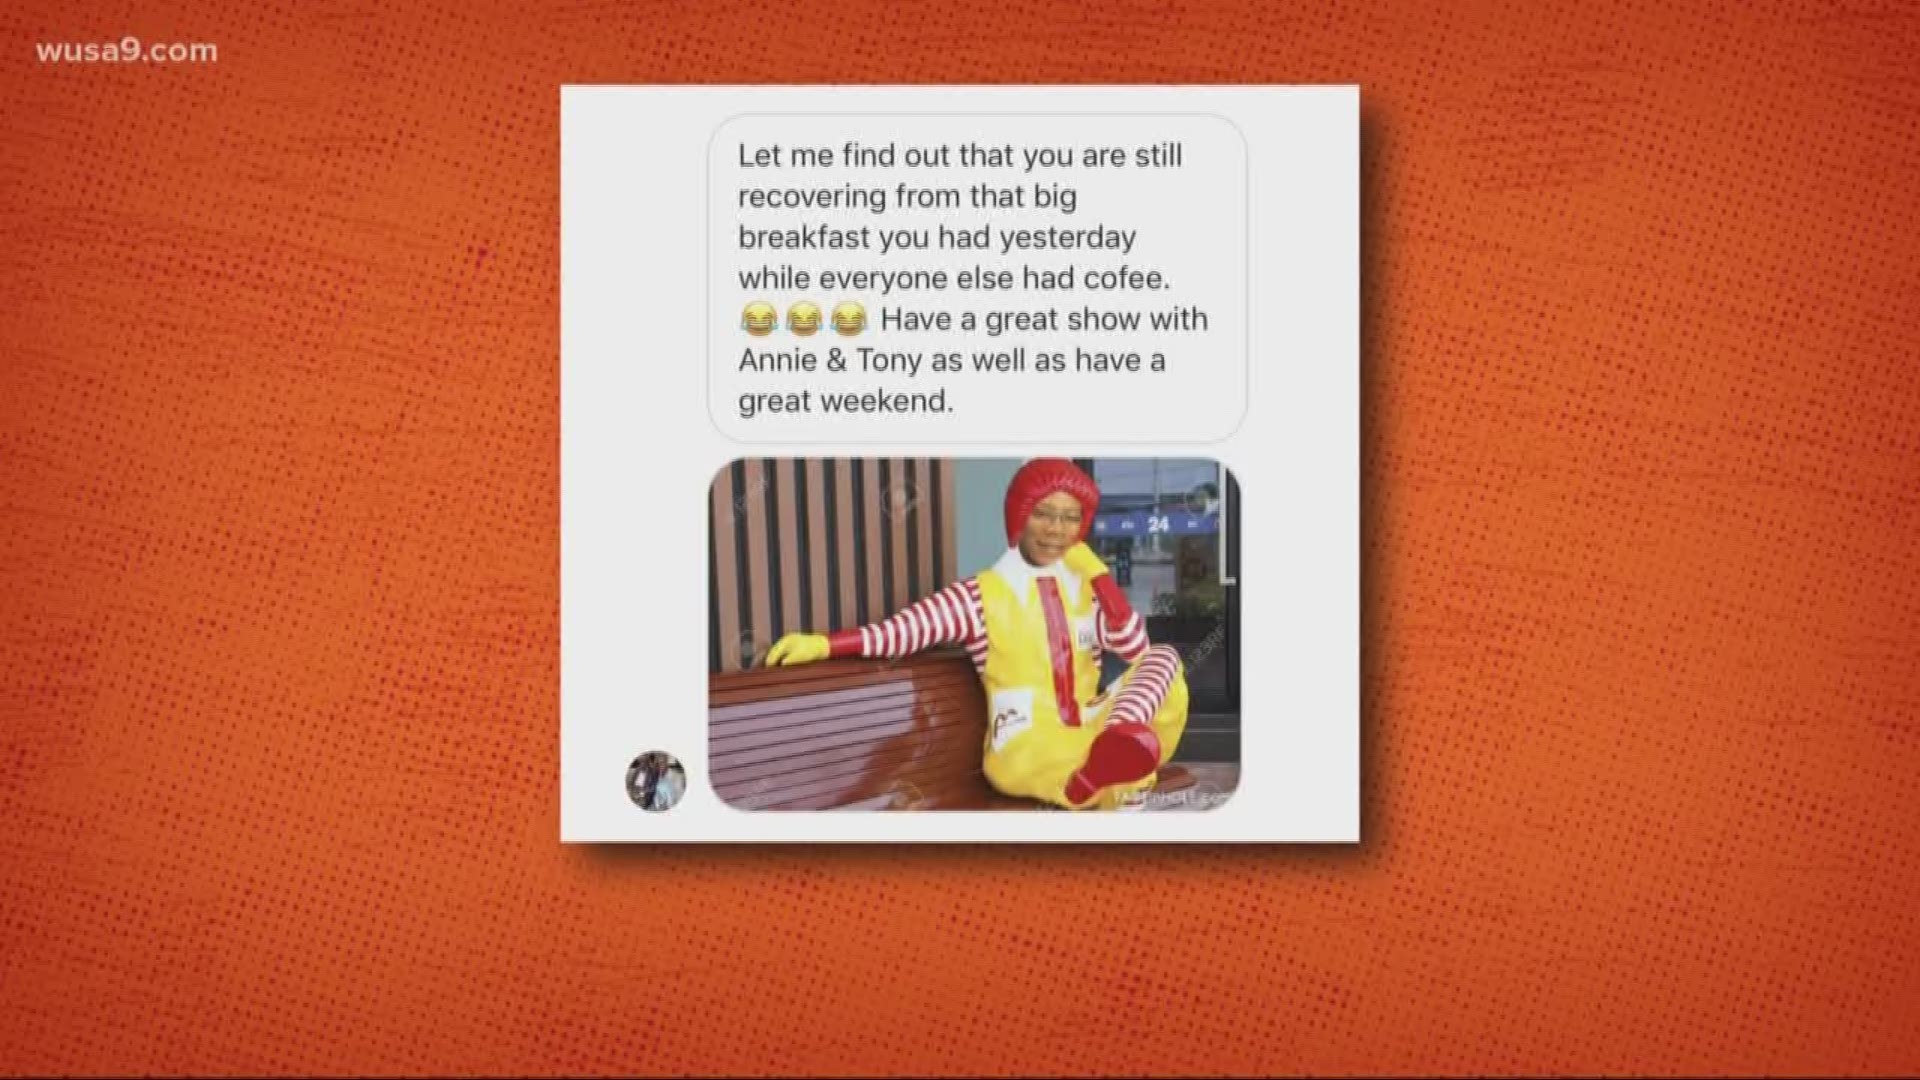 Was Reese born a redhead? Perhaps. This viewer put Reese's face on Ronald McDonald, and honestly he's identical. Enjoy your big breakfast, Reese.